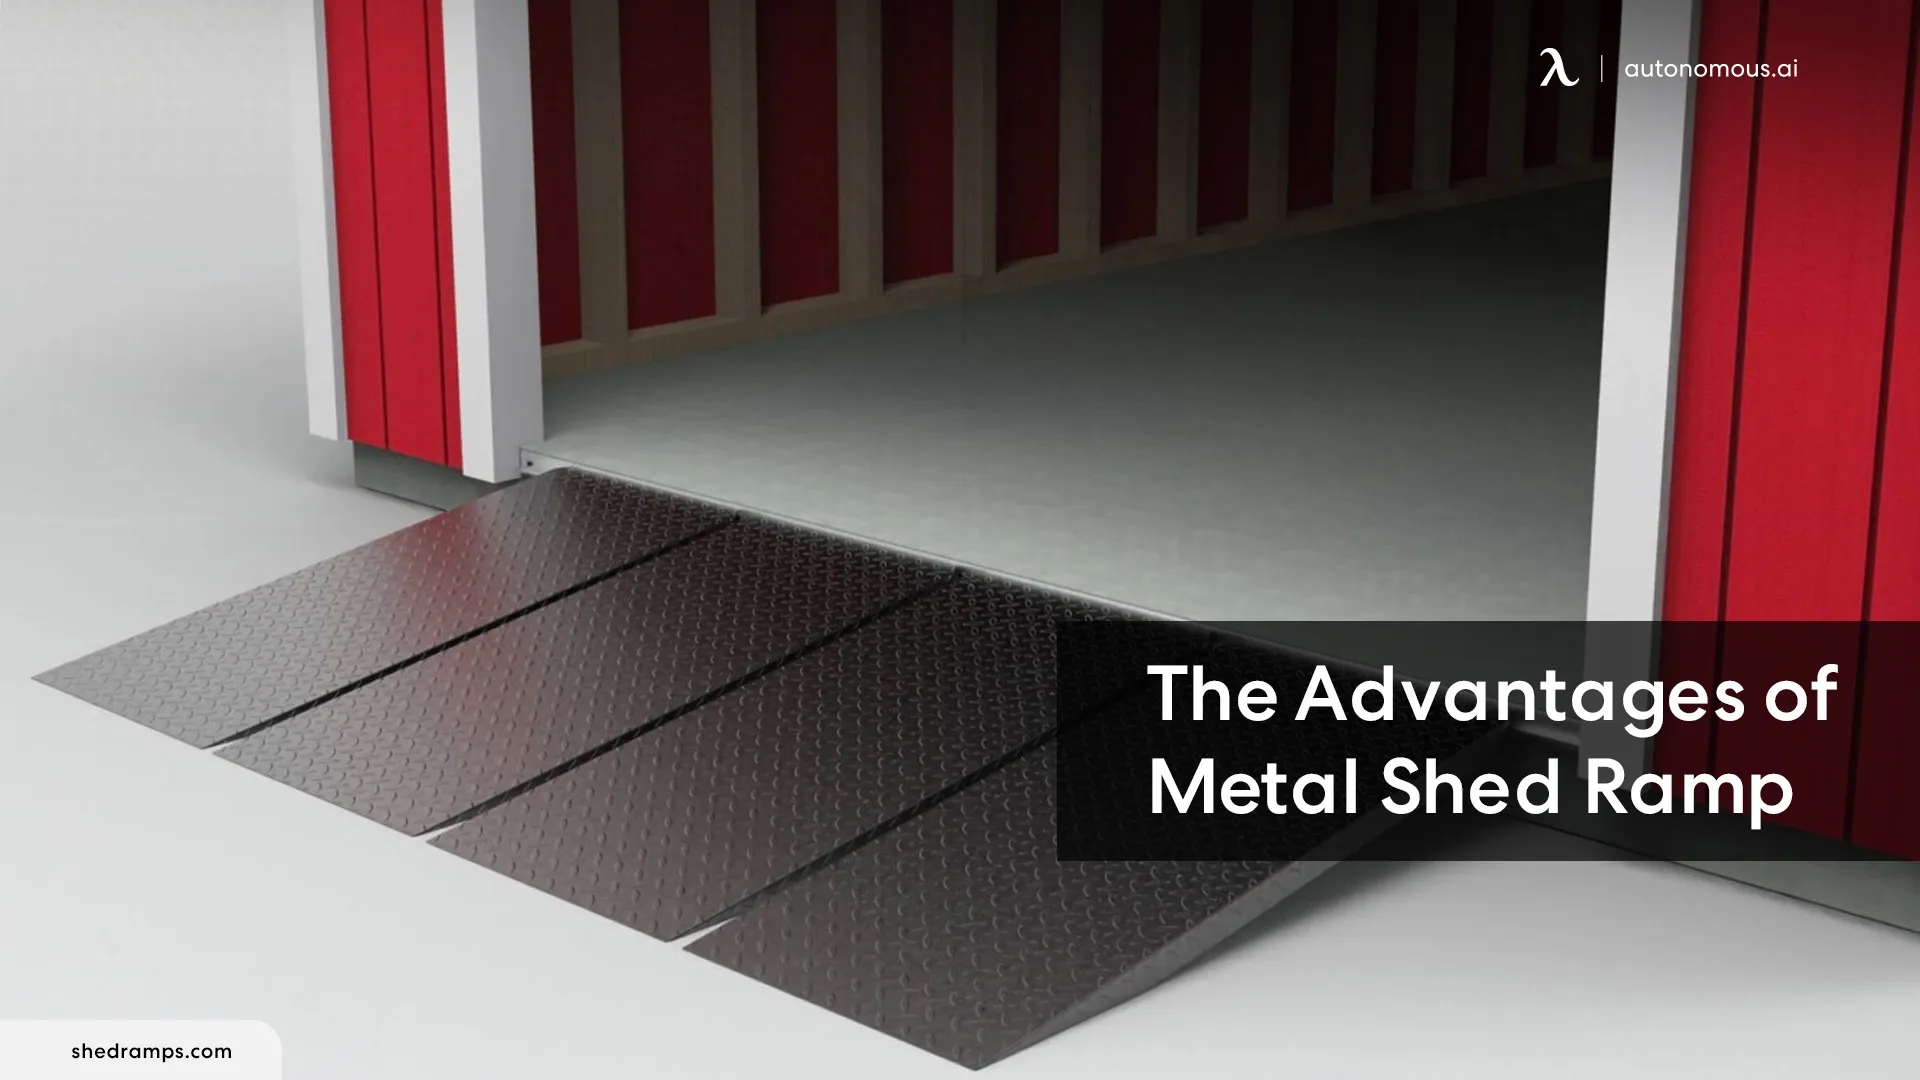 The Advantages of Metal Shed Ramp for Industrial Strength